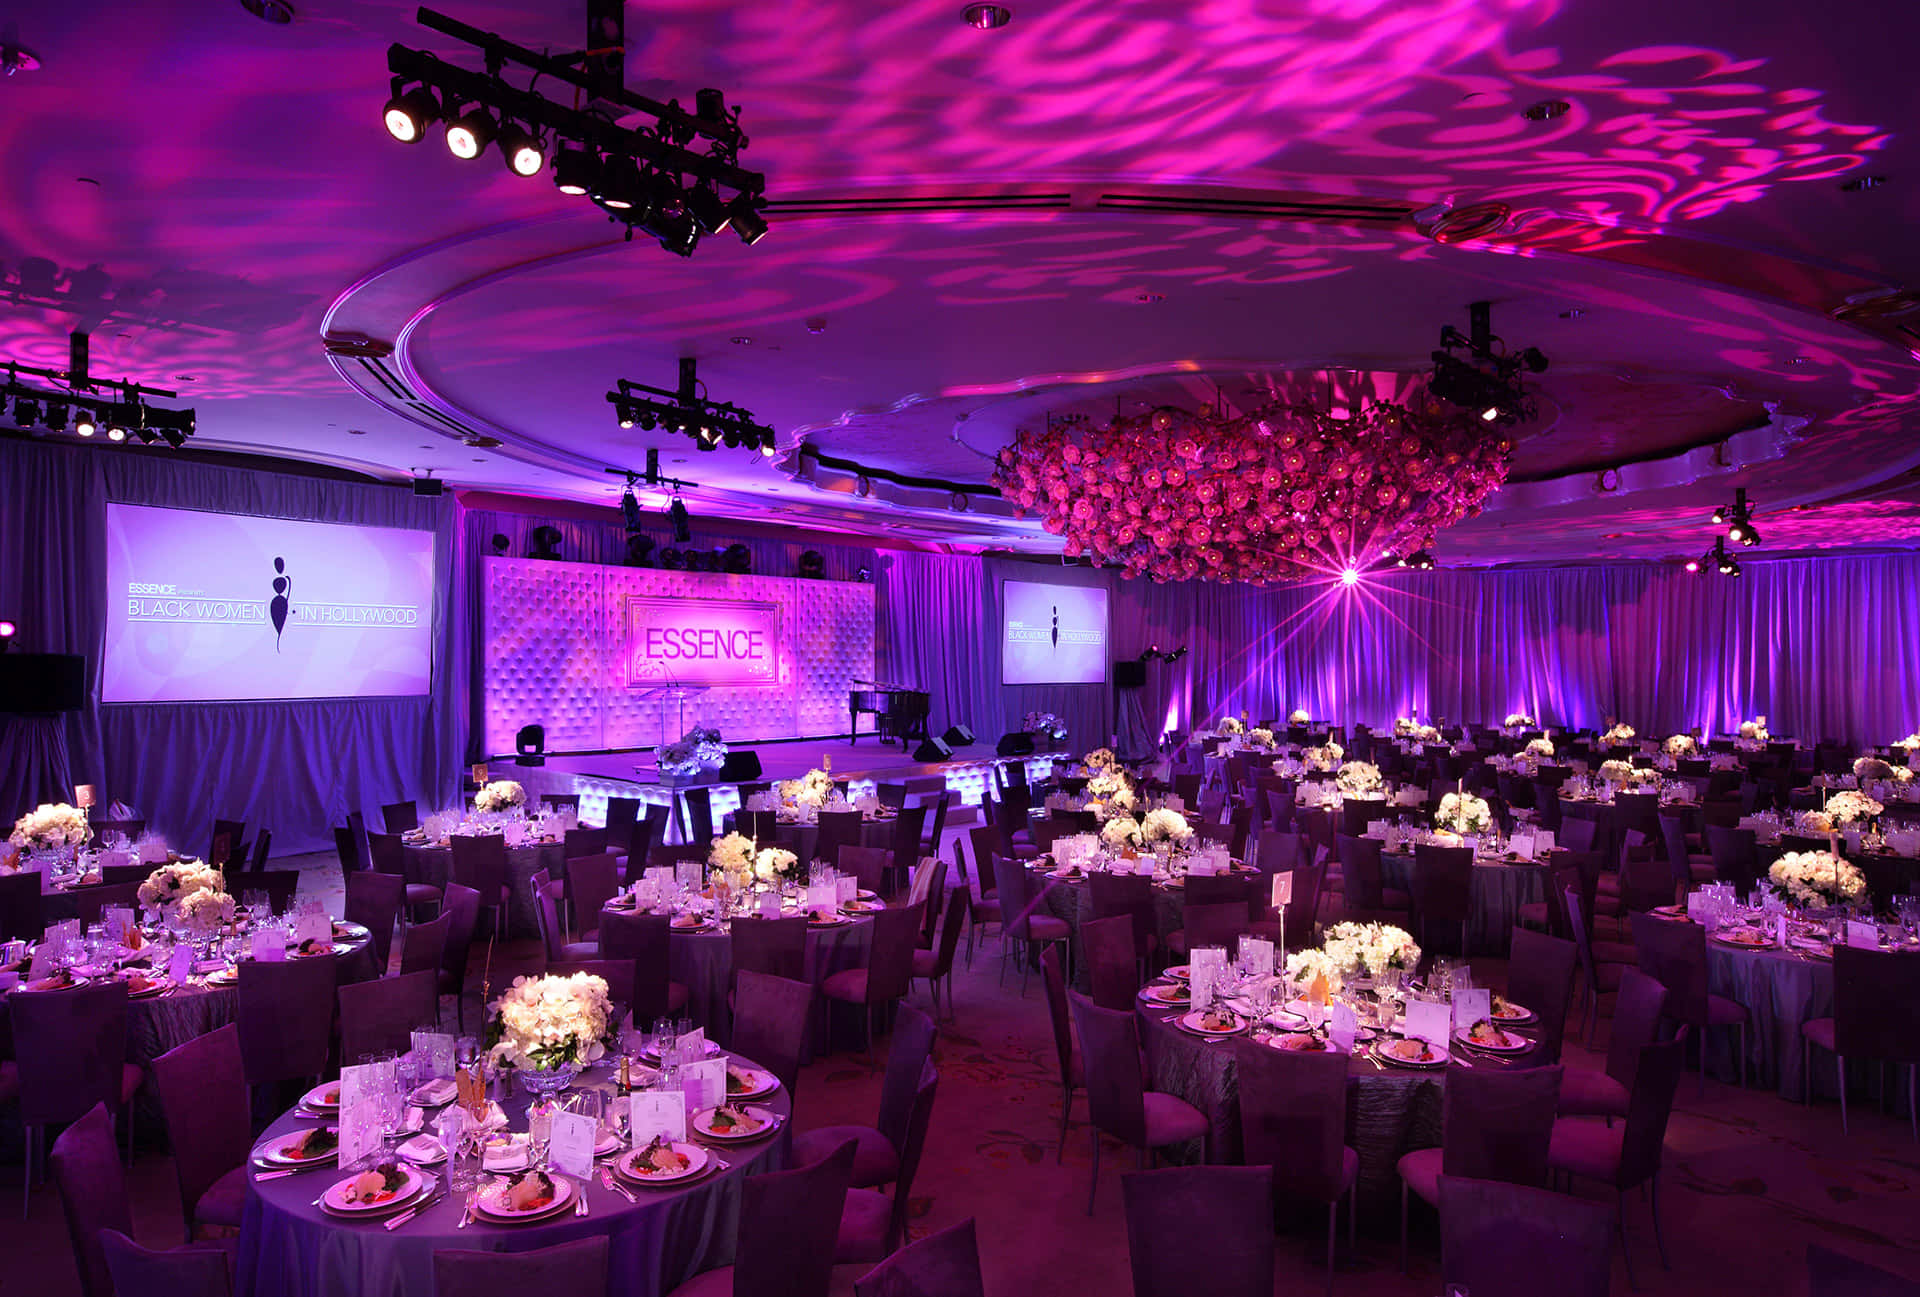 Corporate events create a unique opportunity to engage and connect with customers. Wallpaper